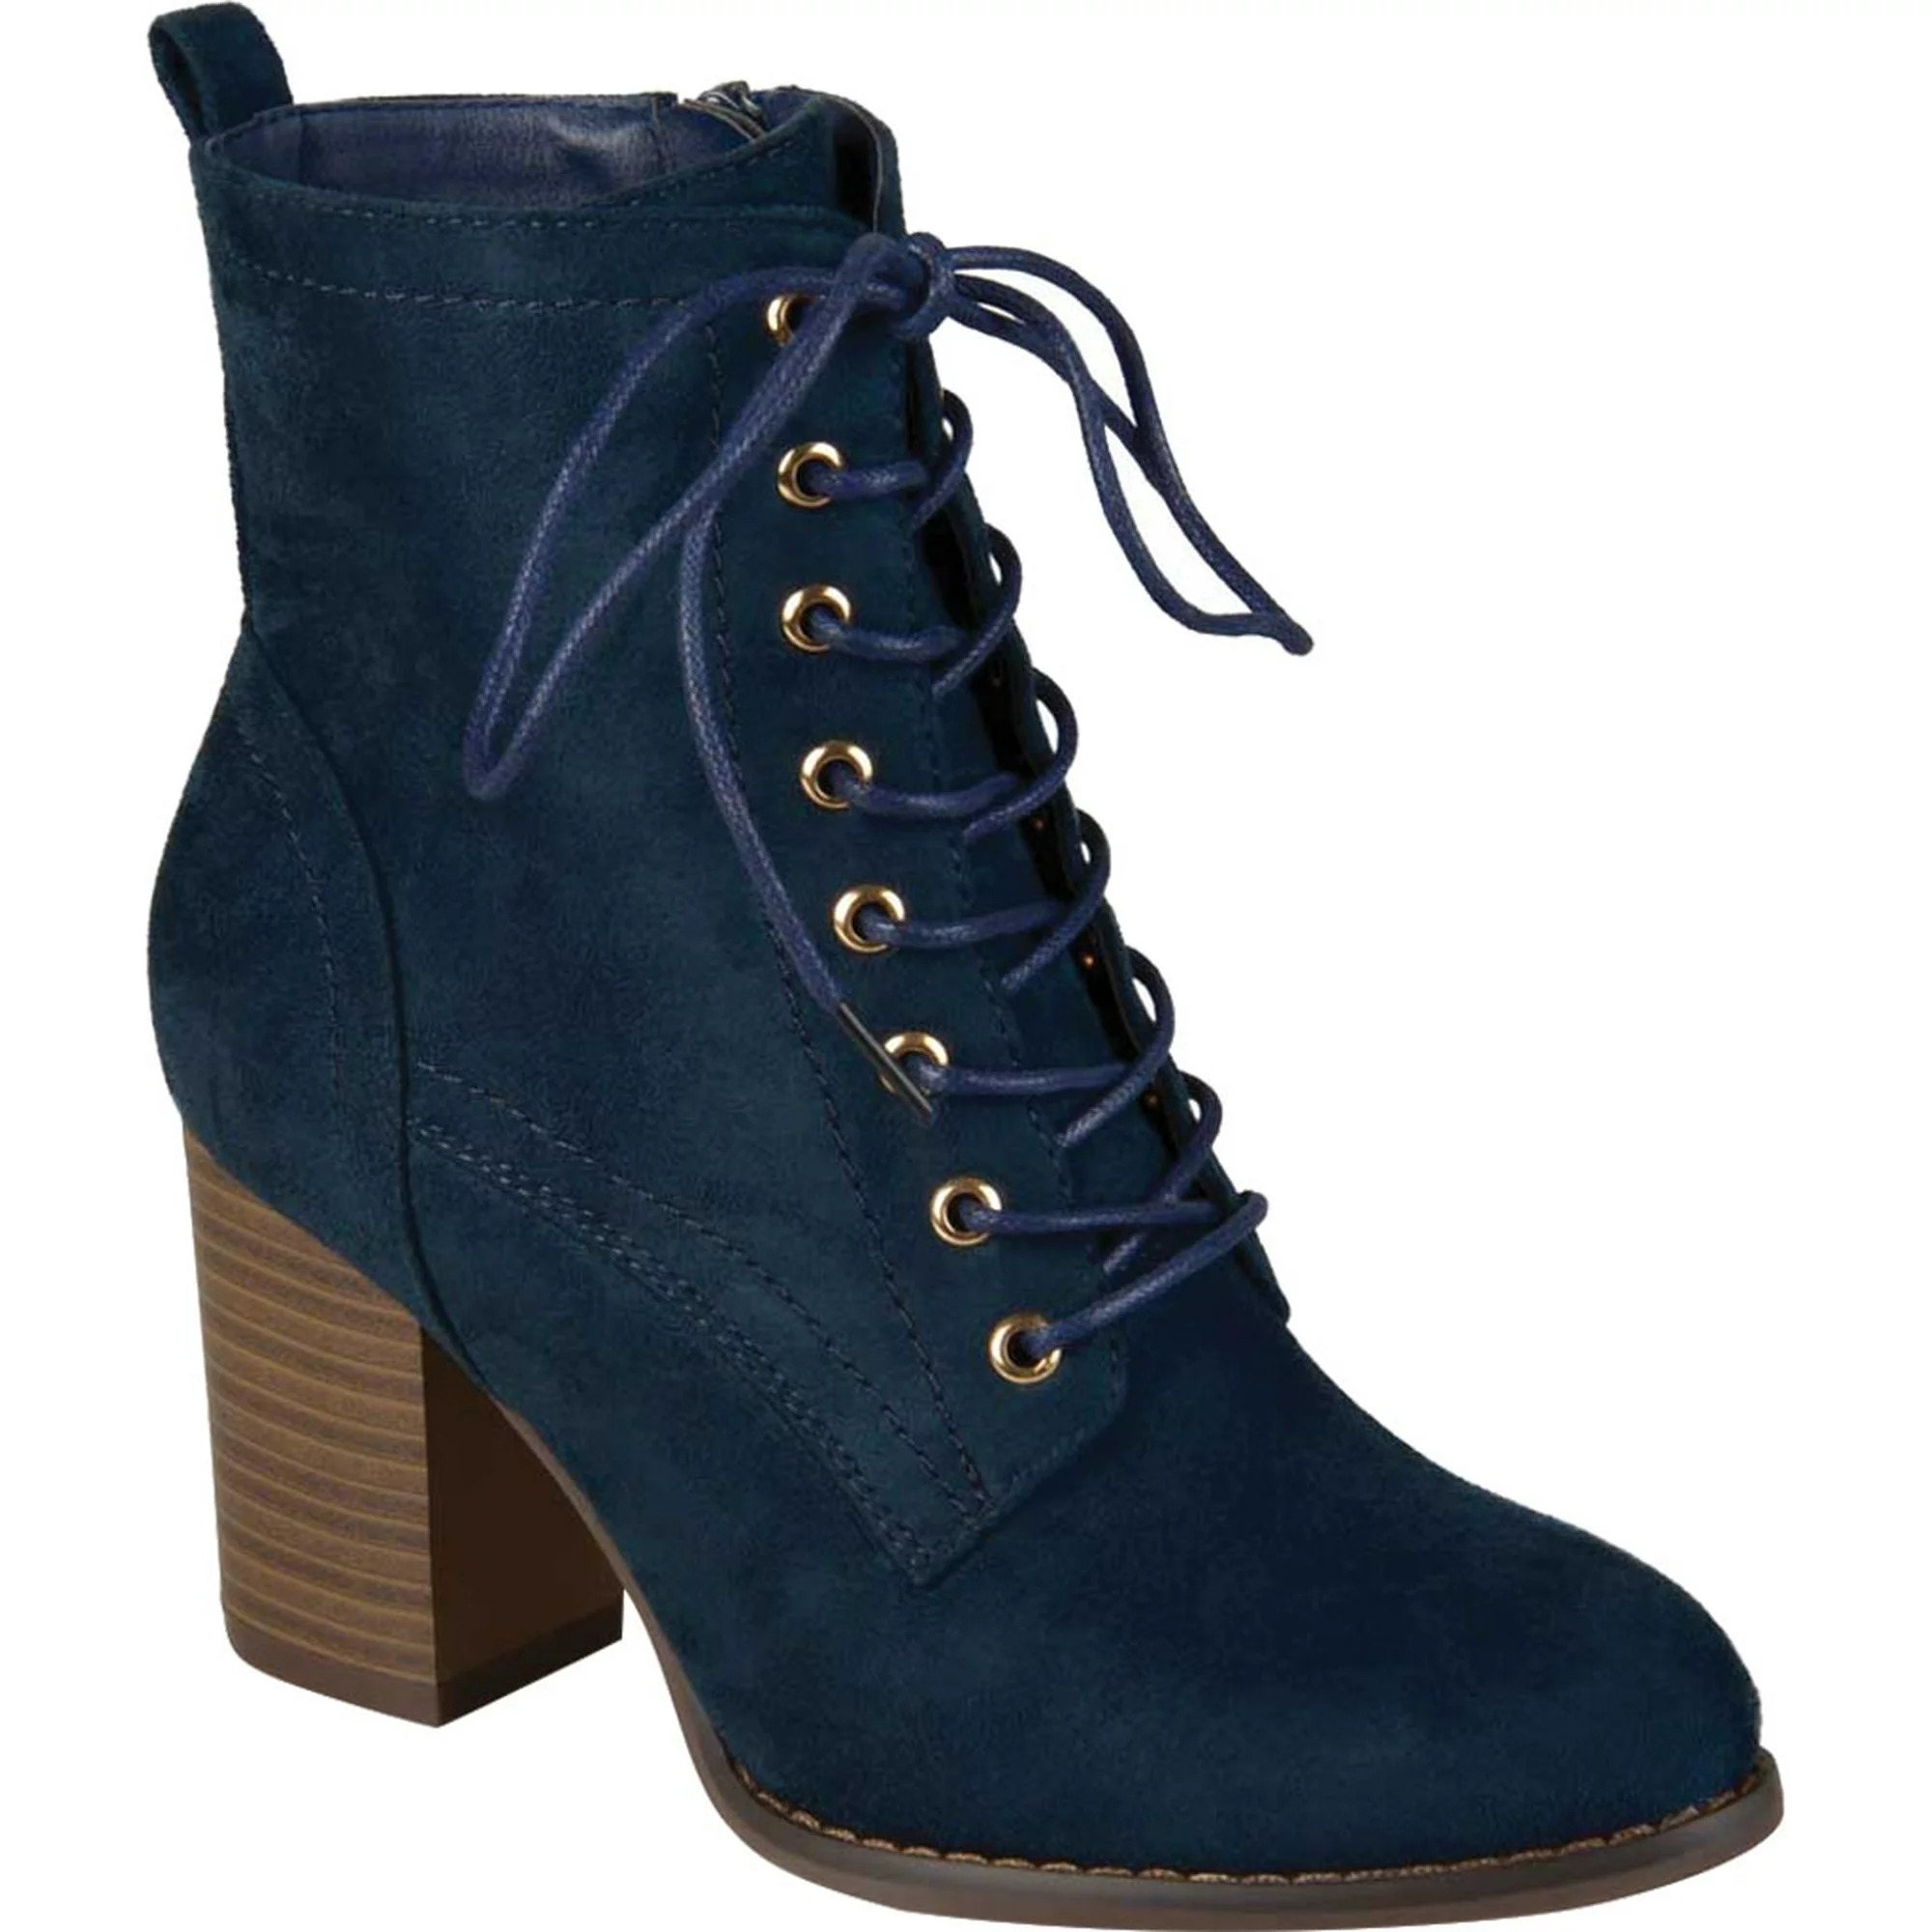 The heeled lace-up boot in a dark blue color with a side zip